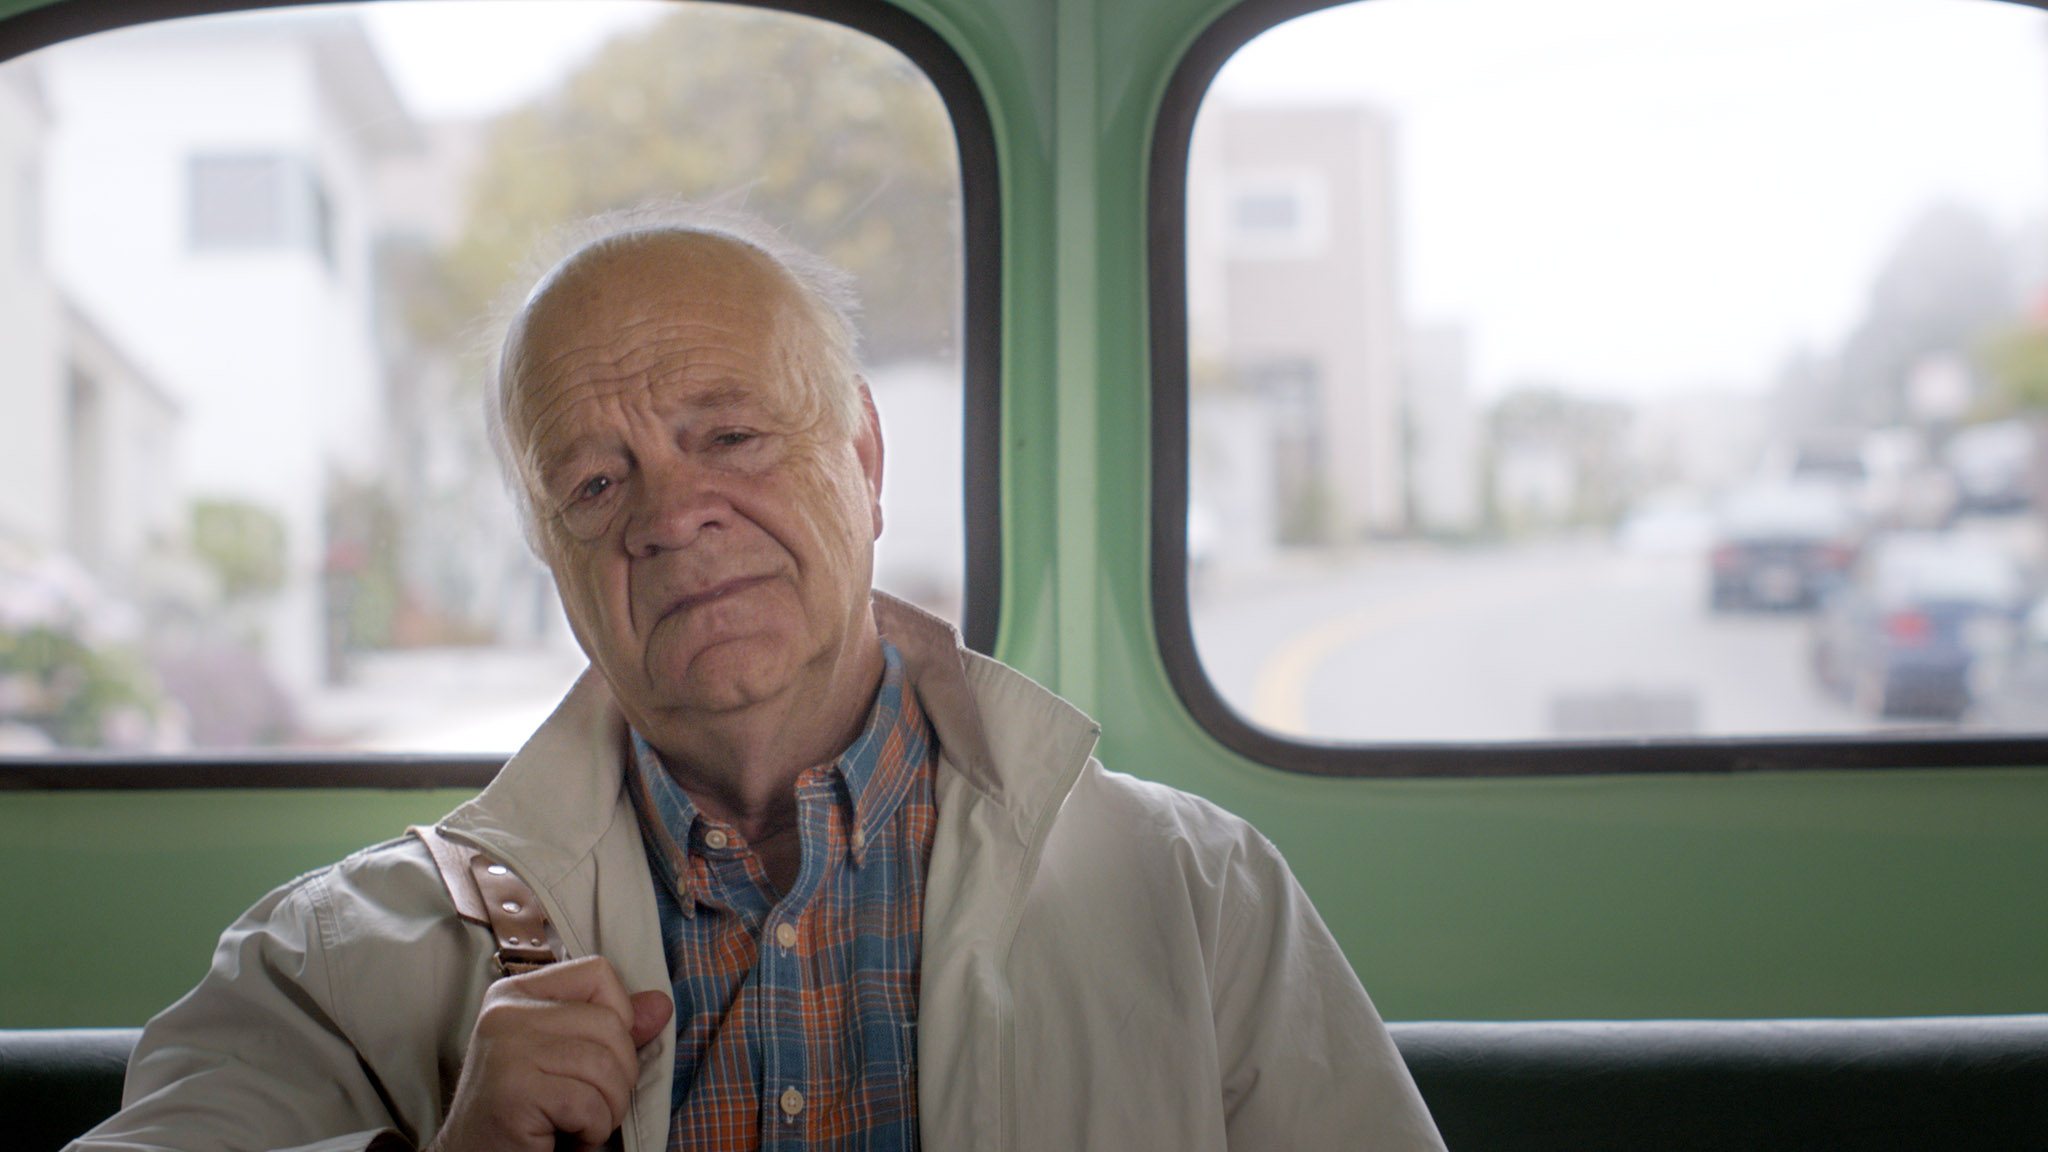 Joel on a bus. Youth, a short film coming in 2016. Starring Jessica Stroup and George Maguire, directed by Brett Marty. A sci-fi film about growing old in a world of perpetual youth.